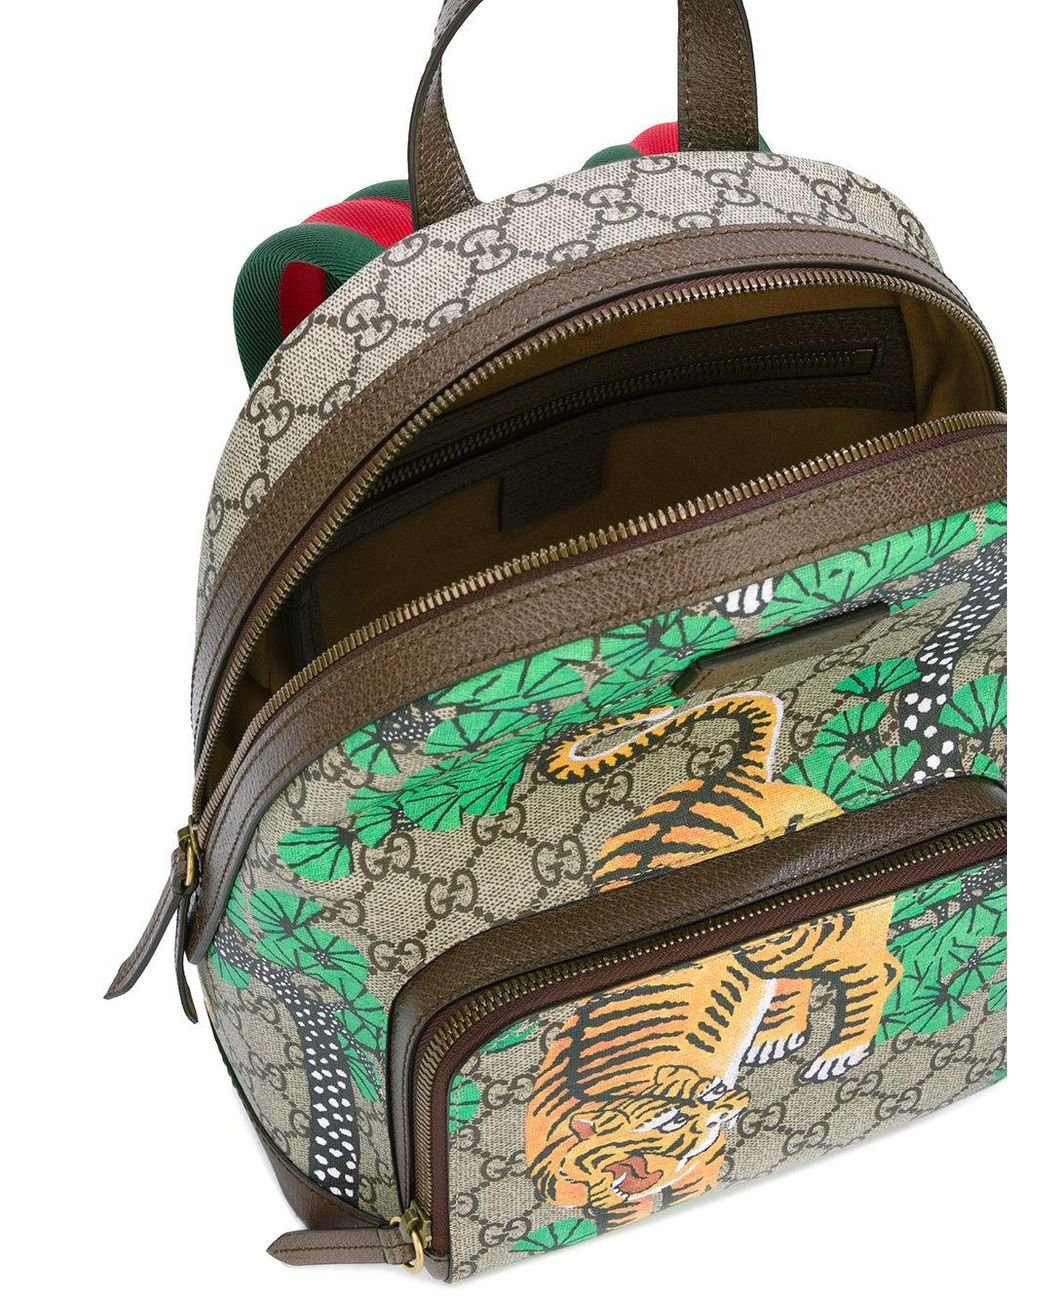 Gucci Bengal Tiger Print Backpack for